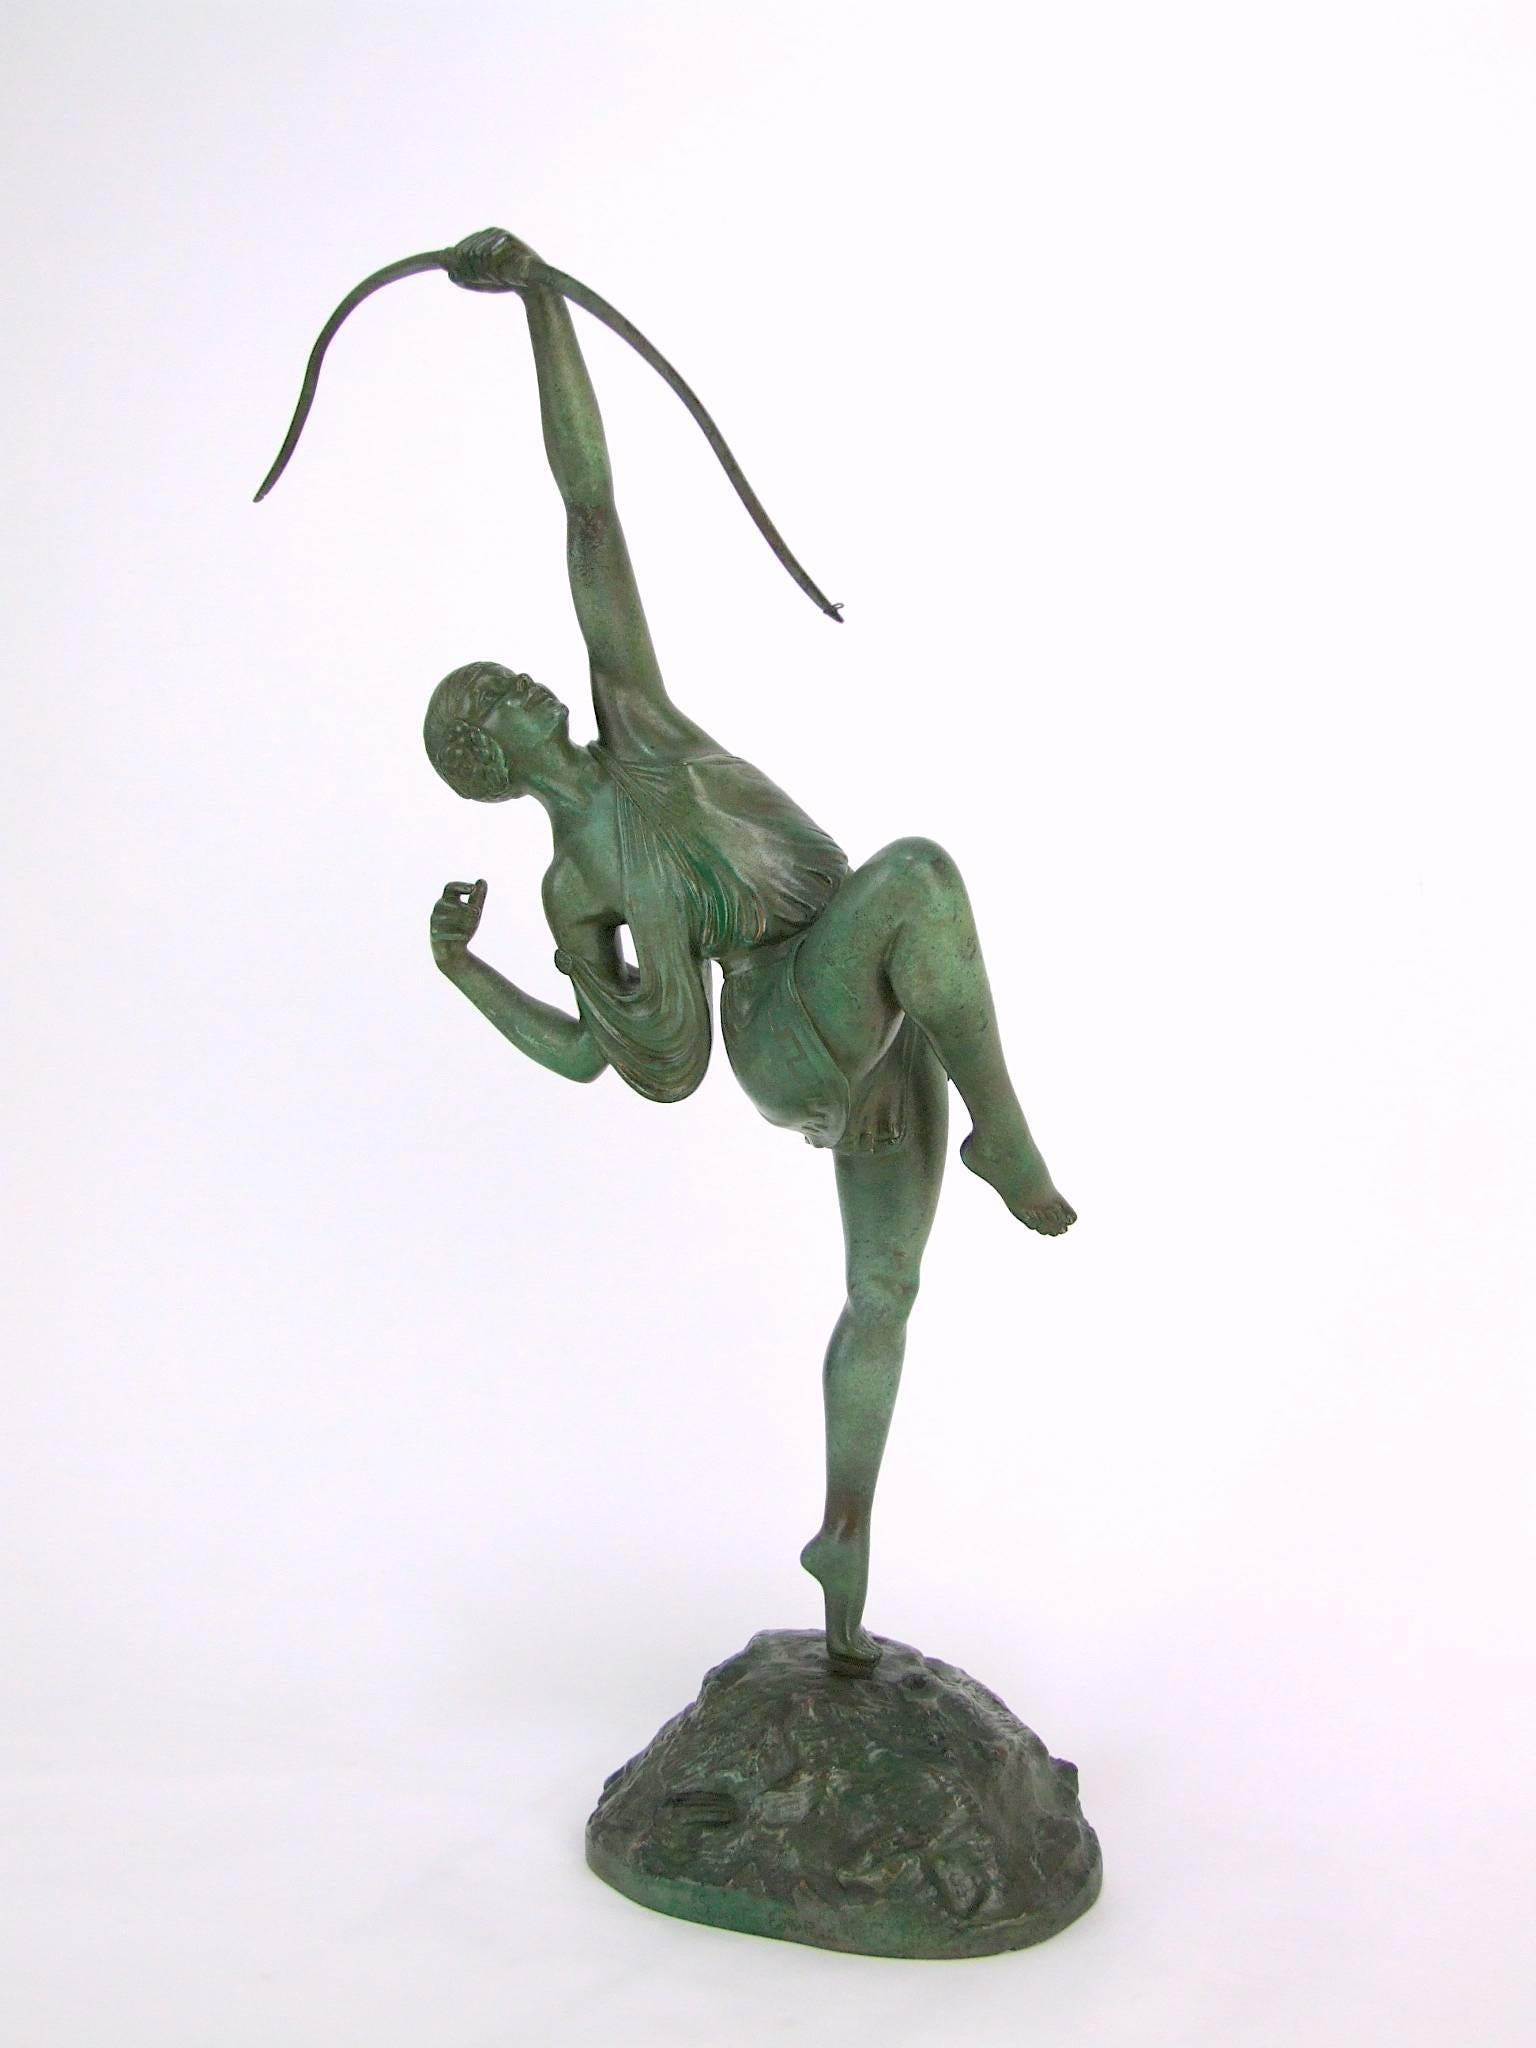 This piece is the medium size version of Danseuse a L'arc by Pierre Le Faguays and cast by the Susse Freres Fondeurs, Paris. (I also have the large version). This one measures nearly 18 inches high and has a green patina and her original bow, and is